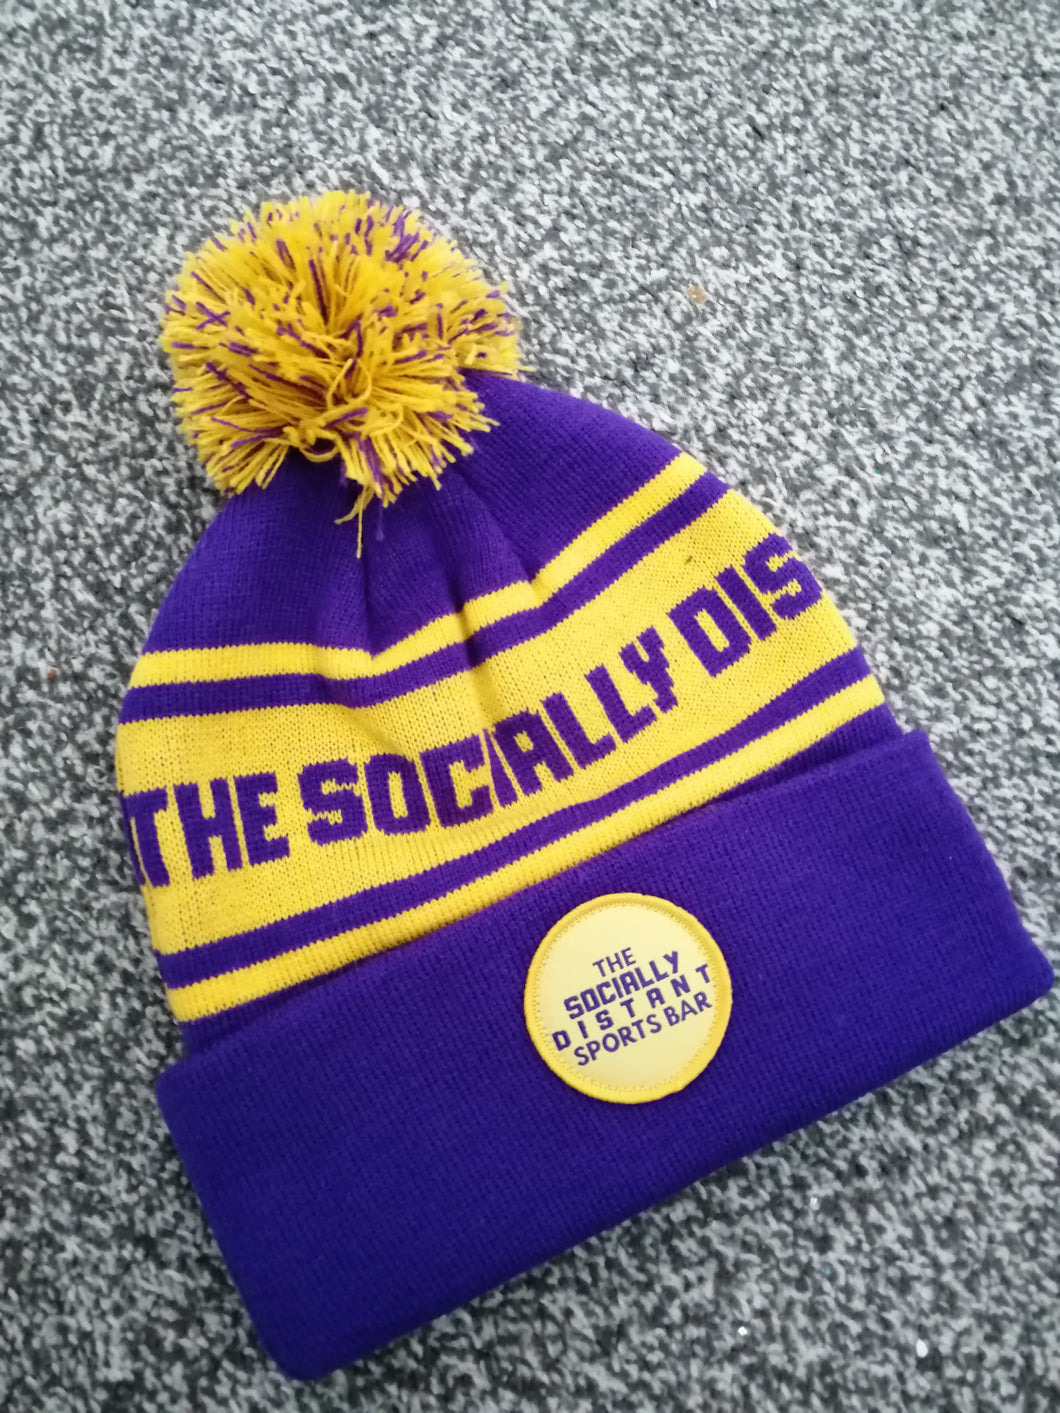 The Socially Distant Sports Bar Bobble Hat